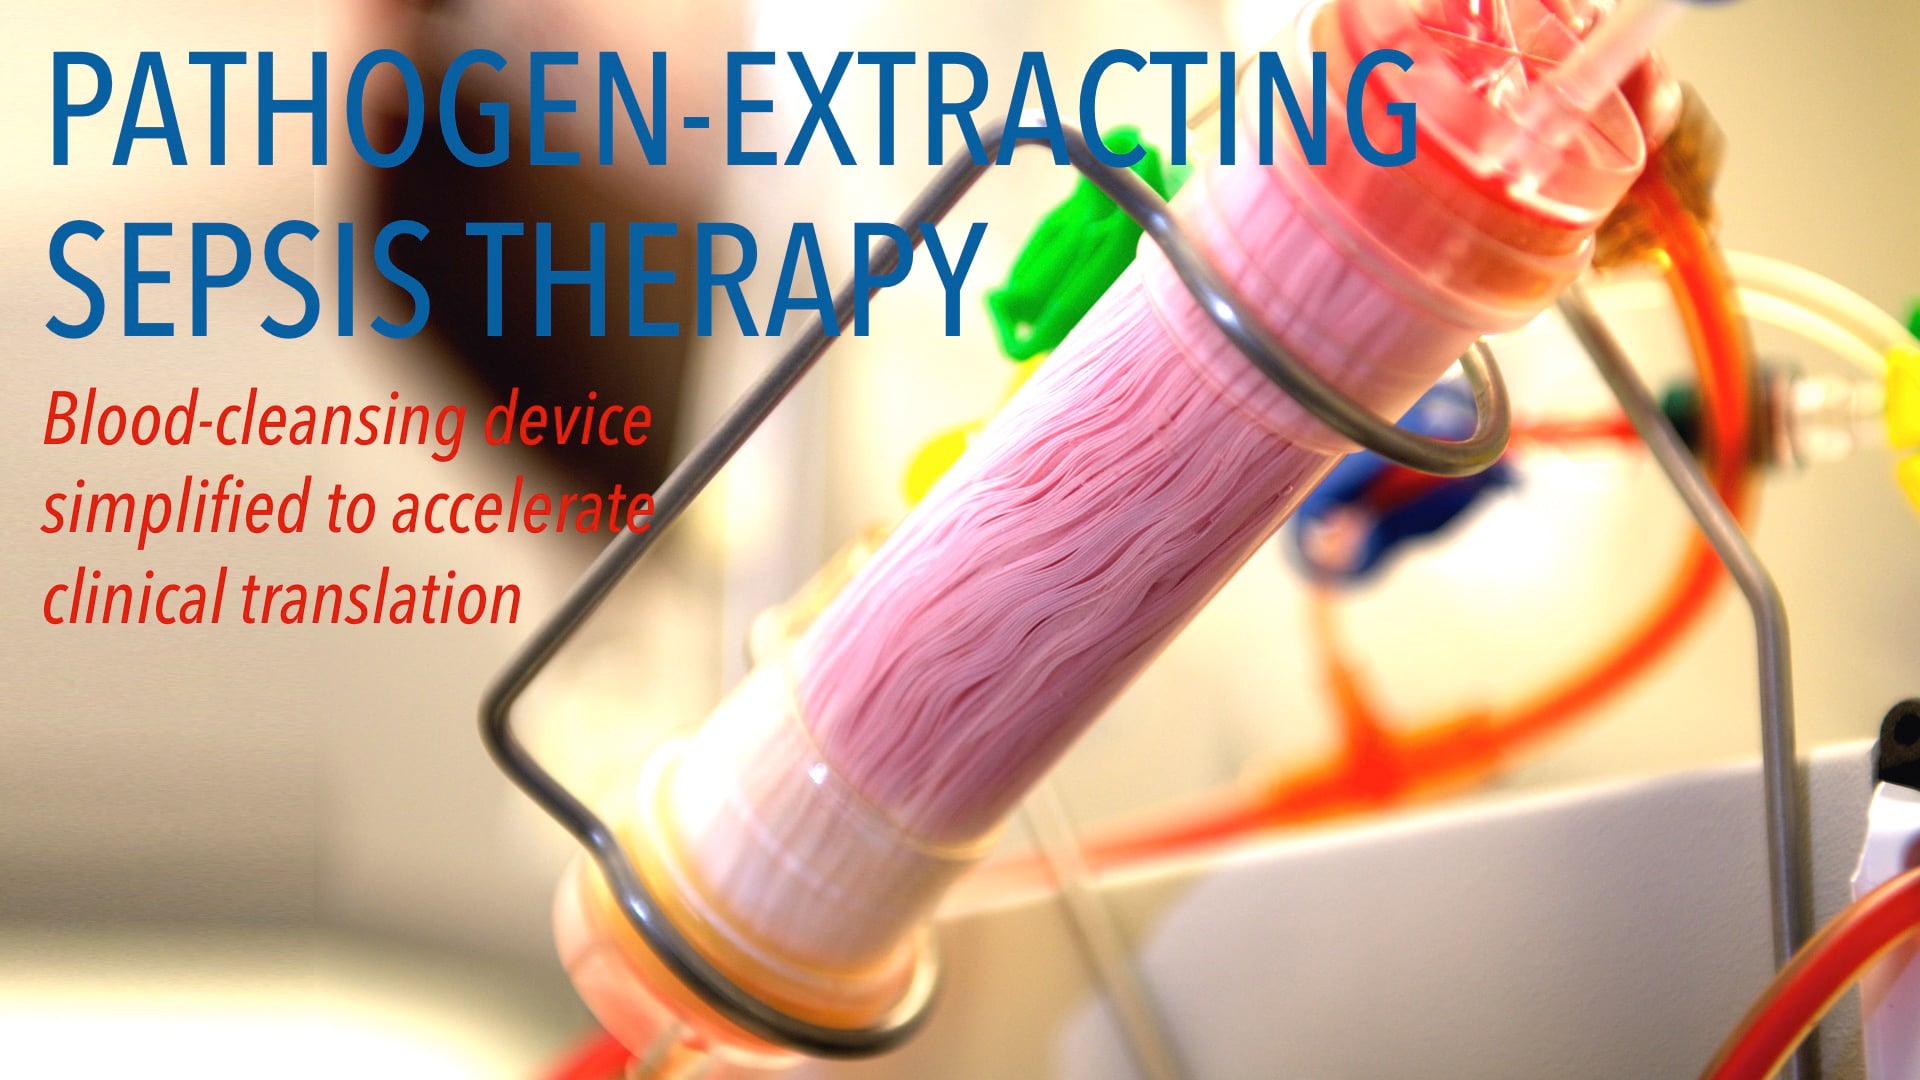 Pathogen-Extracting Sepsis Therapy